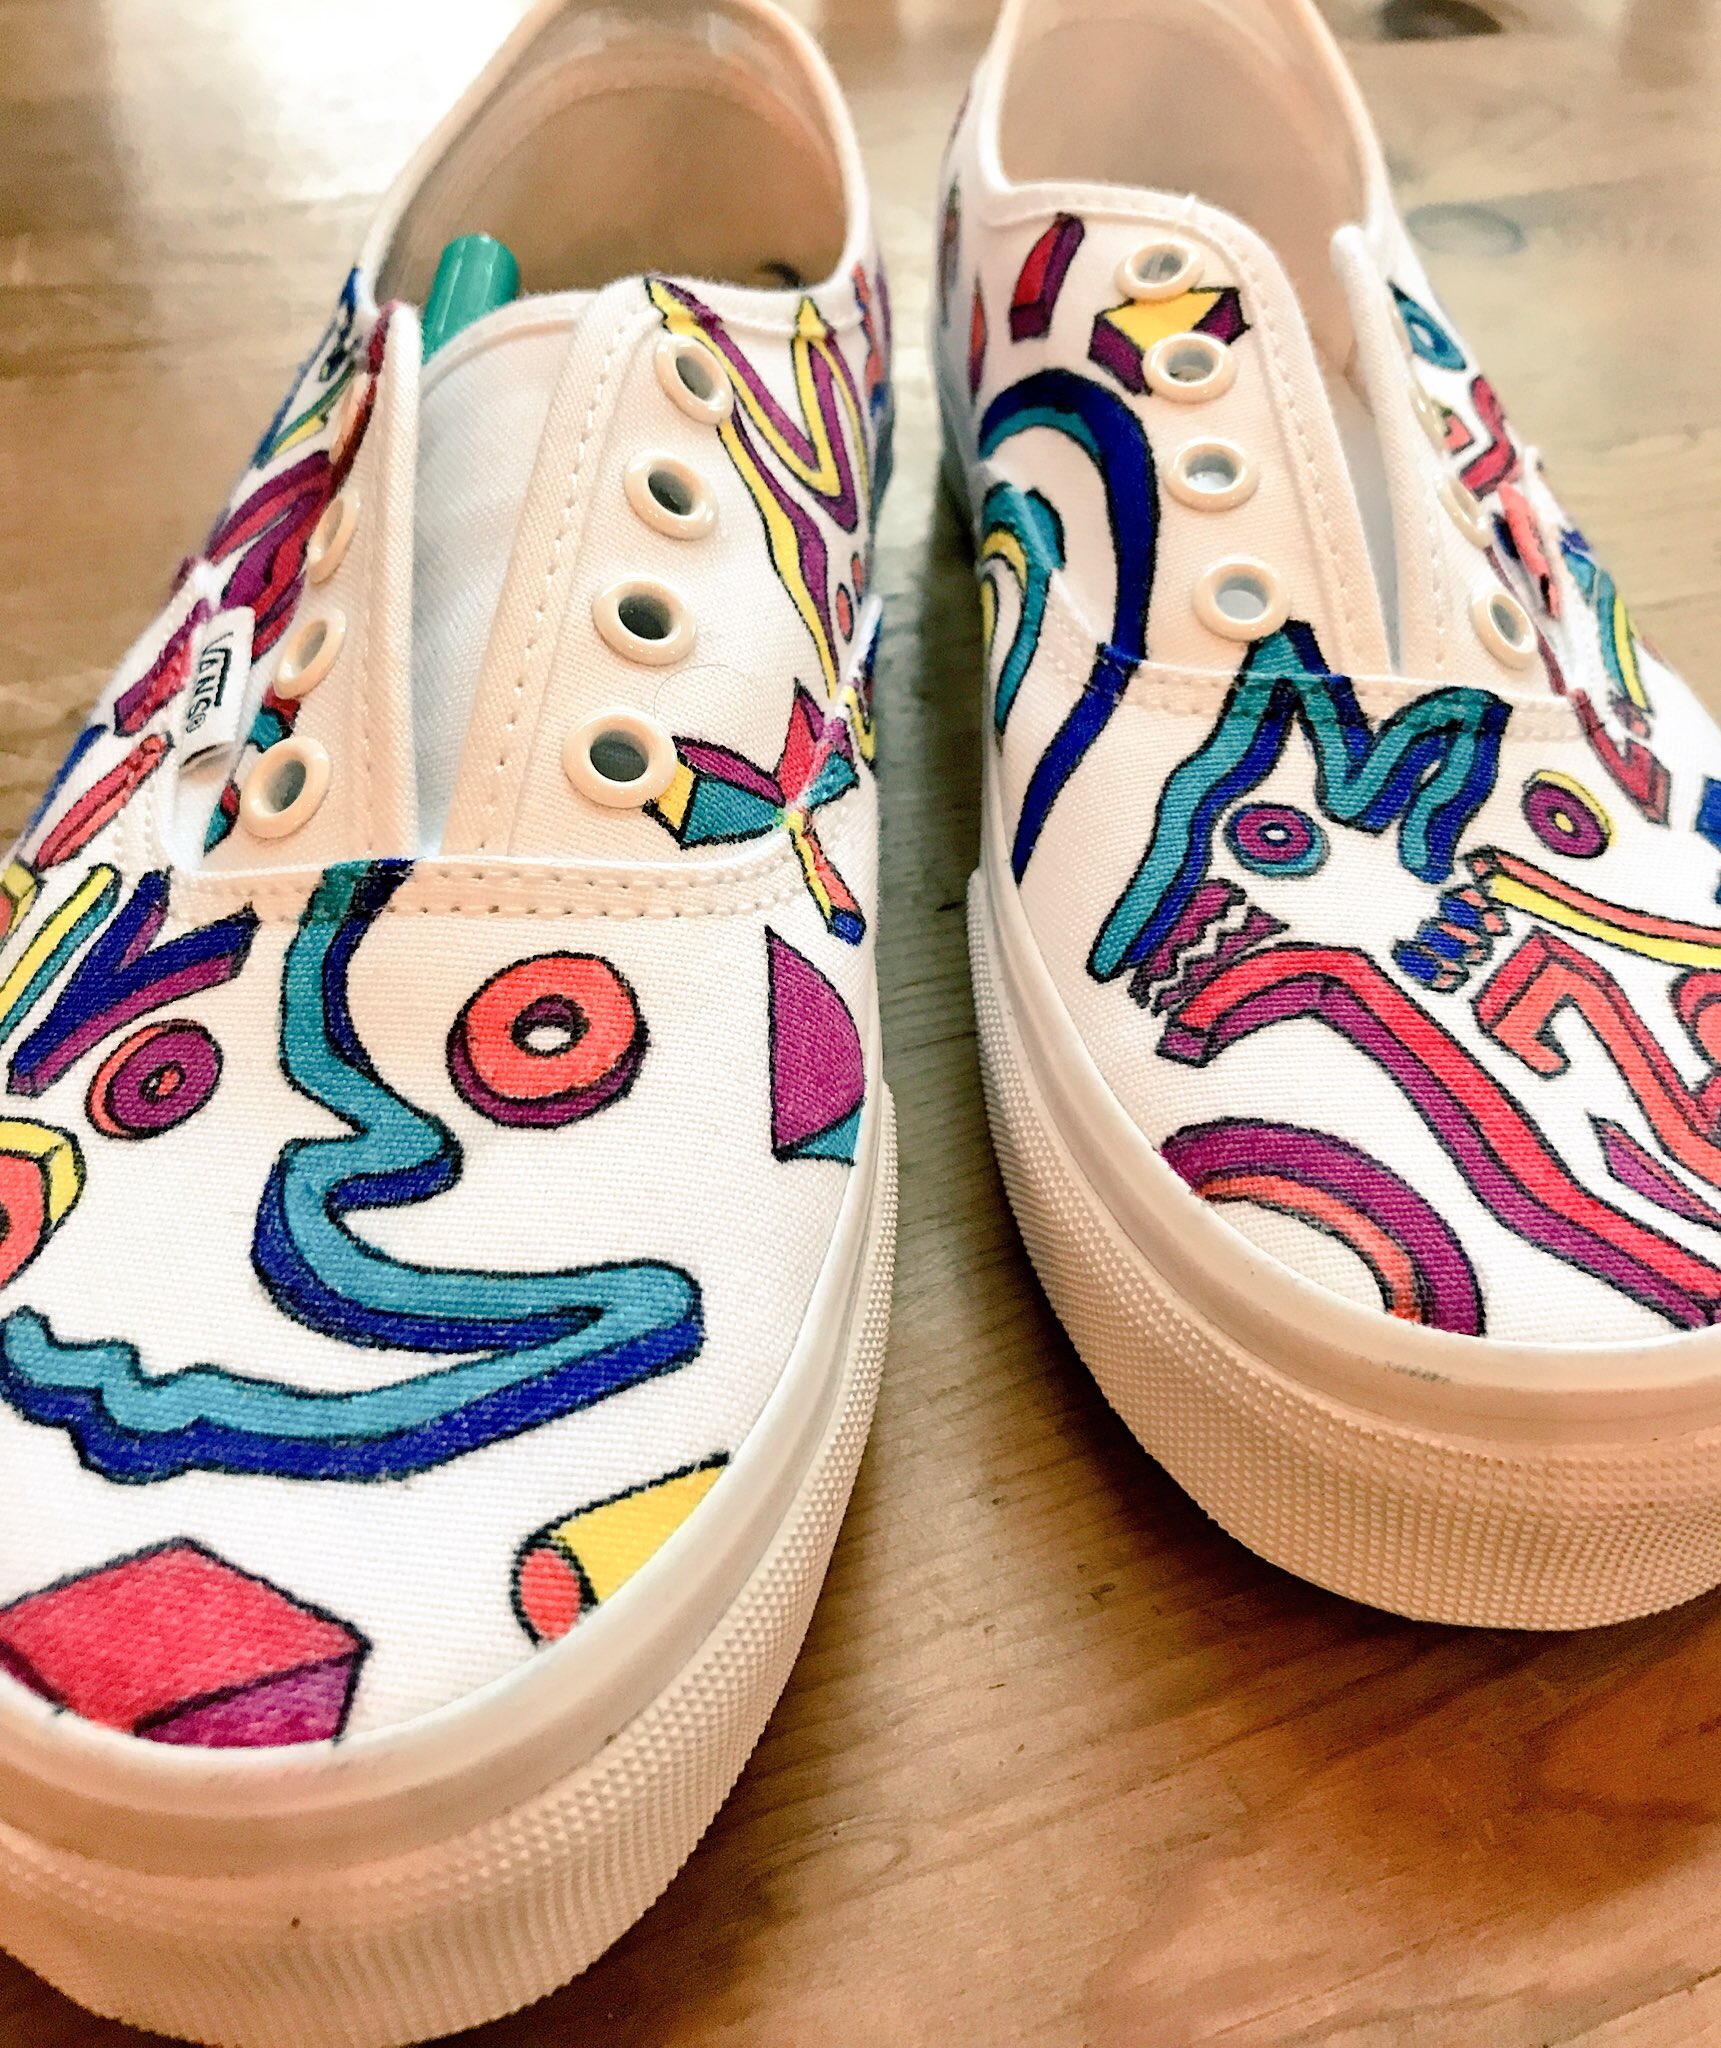 Painting Shoes: Part 3 – Where Creativity Works